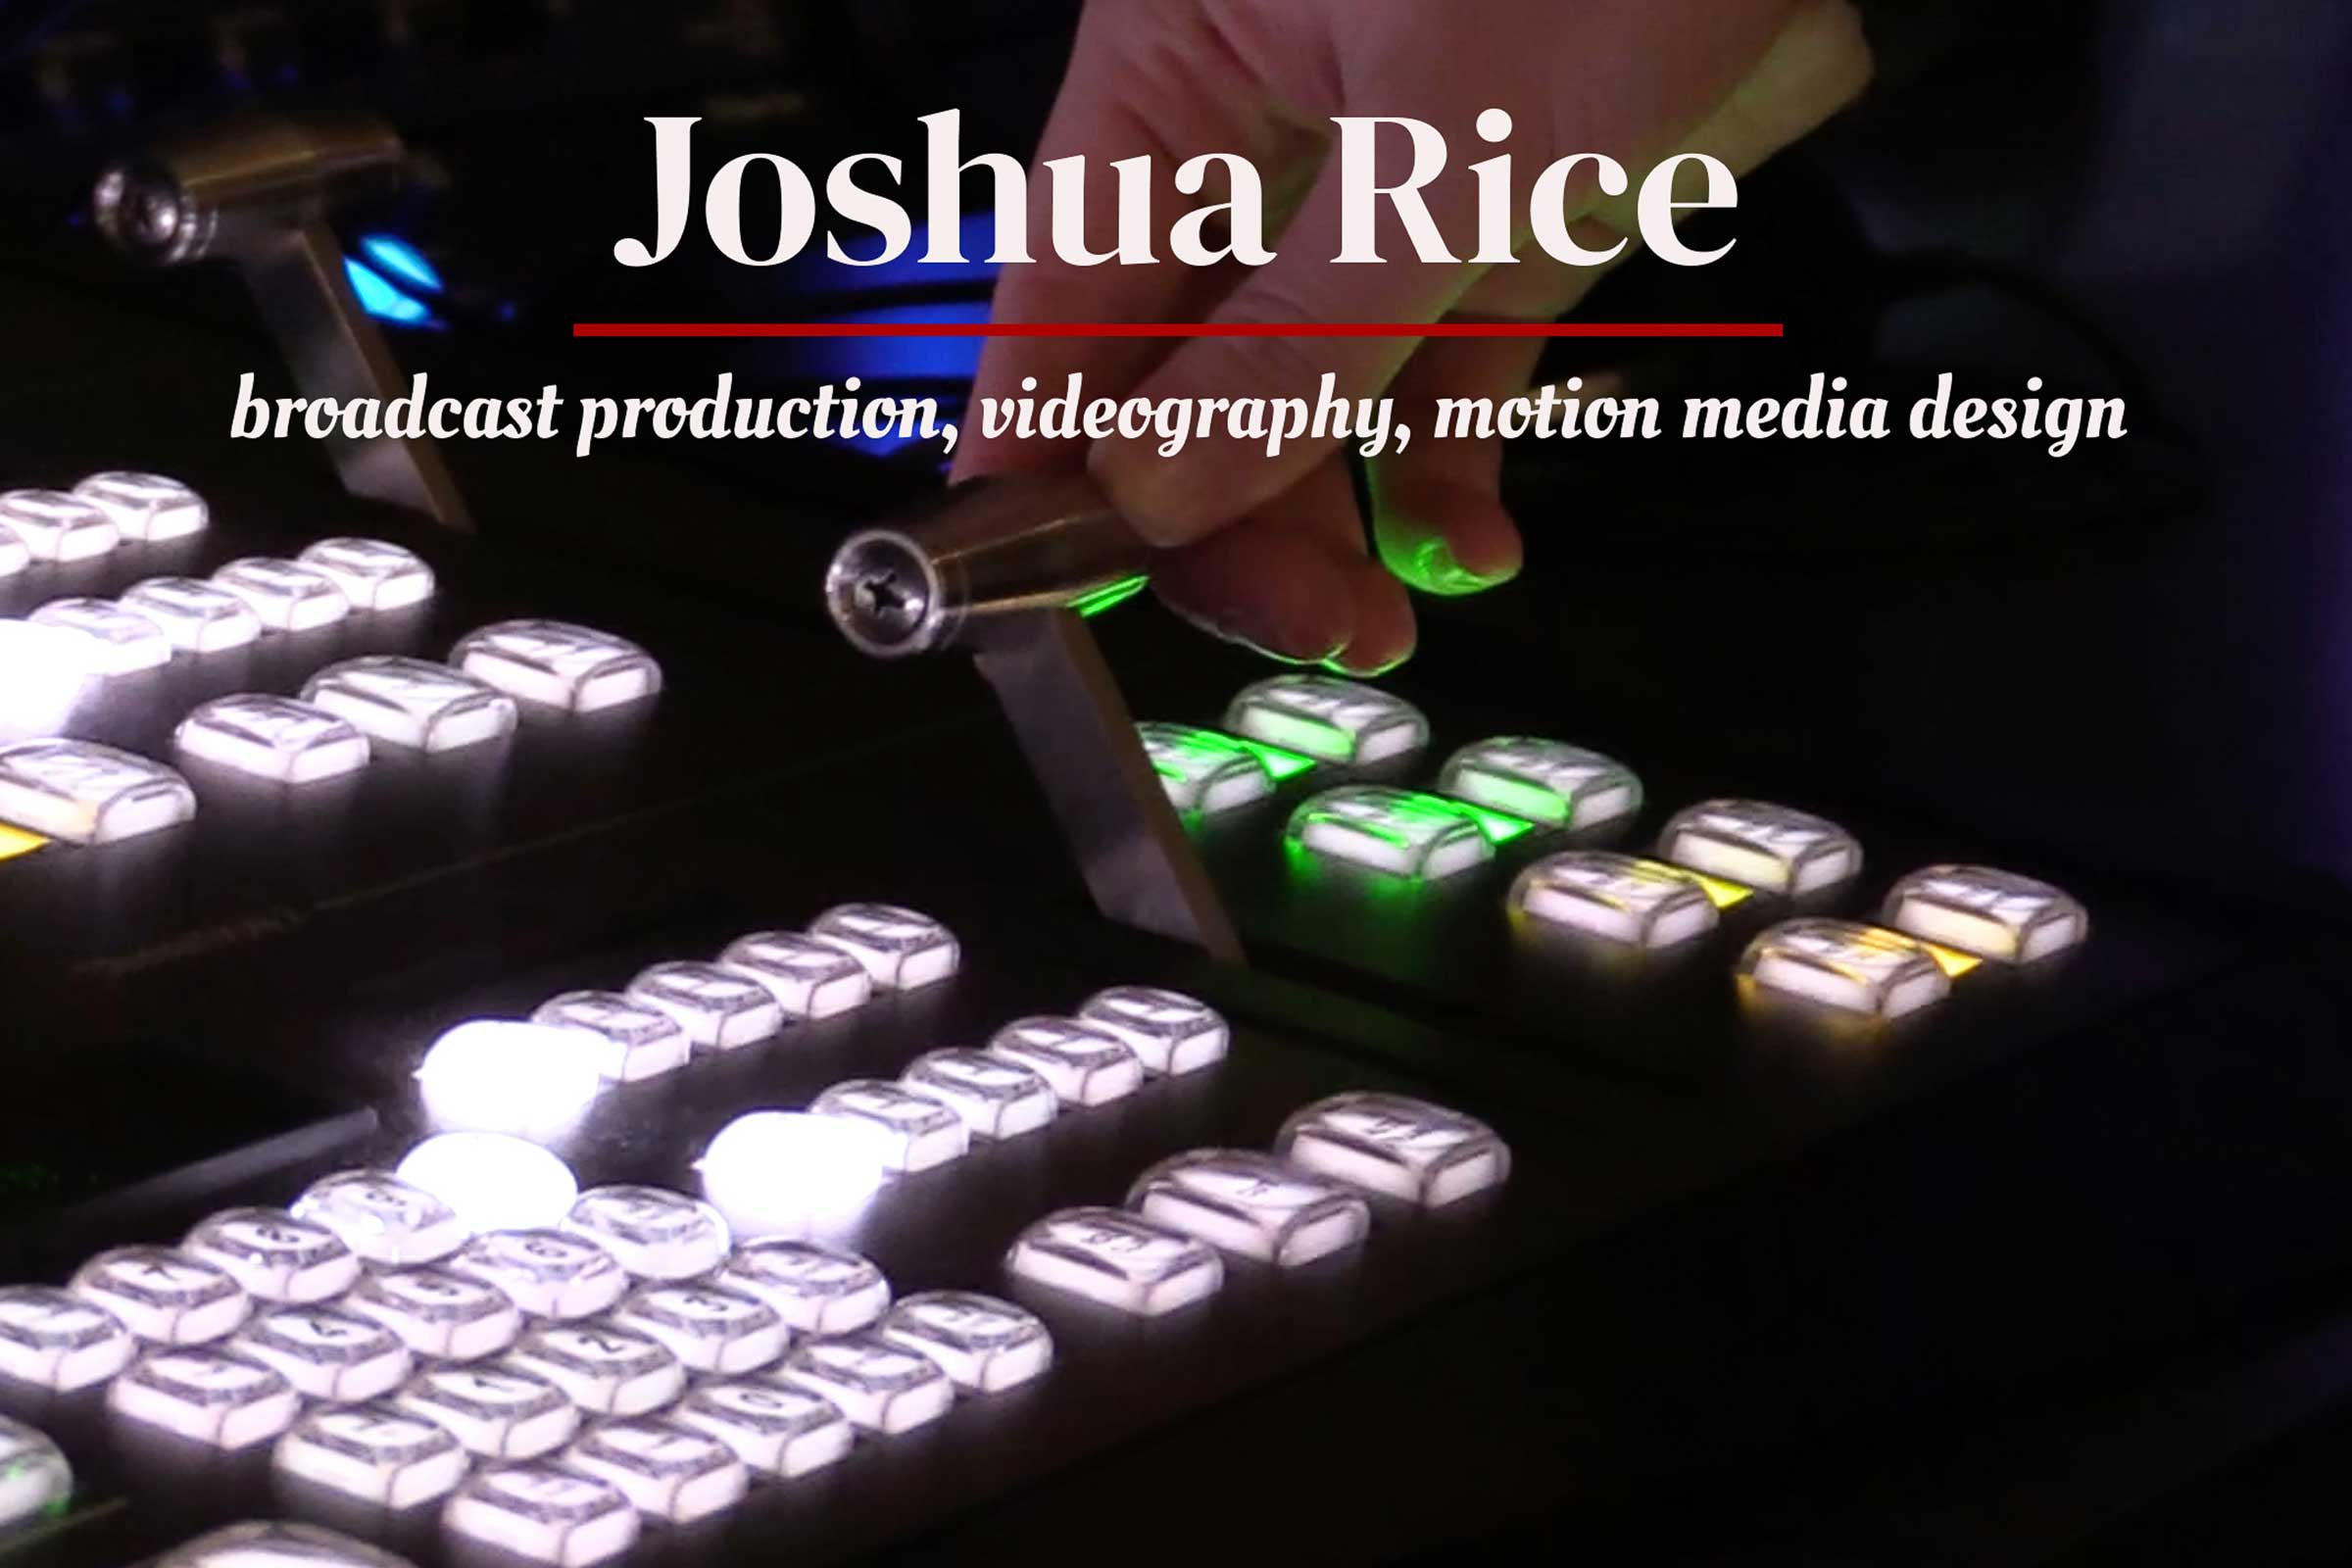 Image displaying a video switcher with the text "Joshua Rice - broadcast production, videography, motion media design."